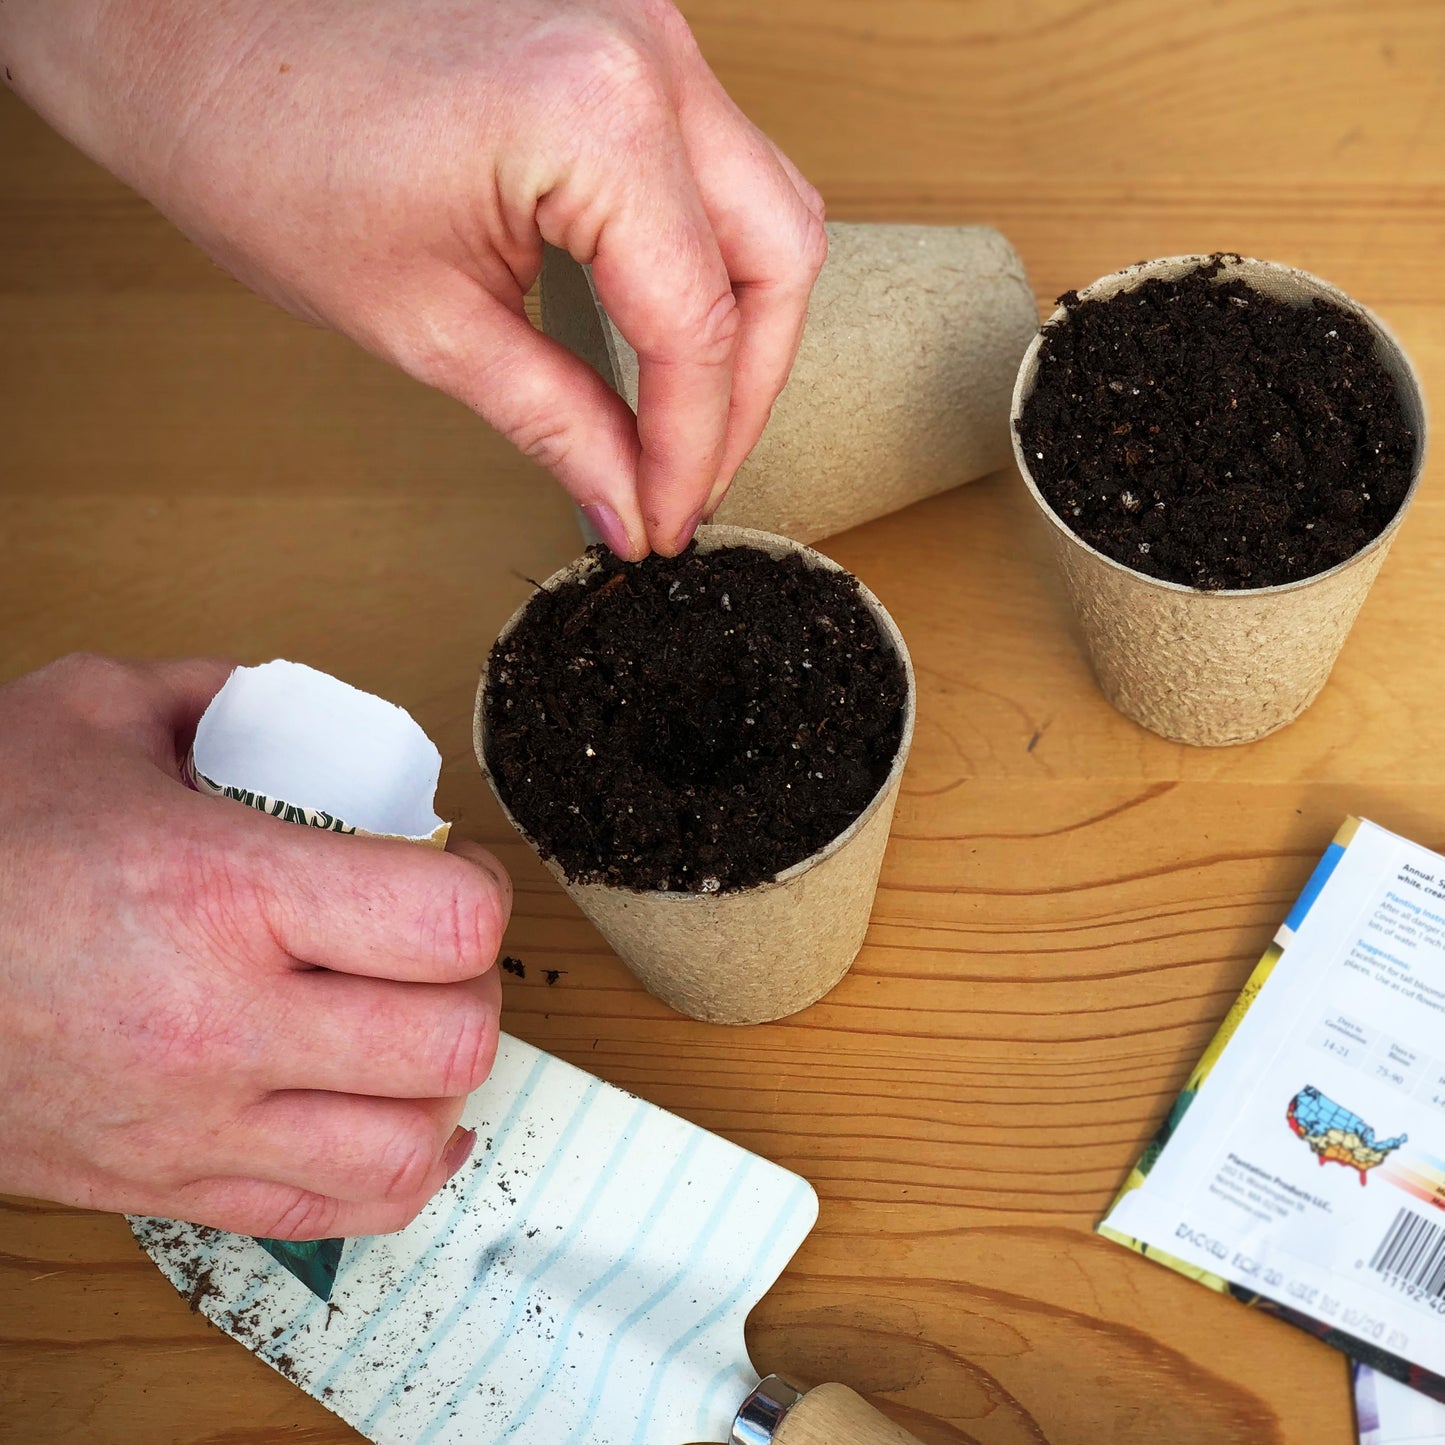 Start your Organic Roma Tomato seeds in biodegradable Jiffy peat pots or paper pots for easy transplant when seedlings are ready. Pot can go into ground and prevent root shock.